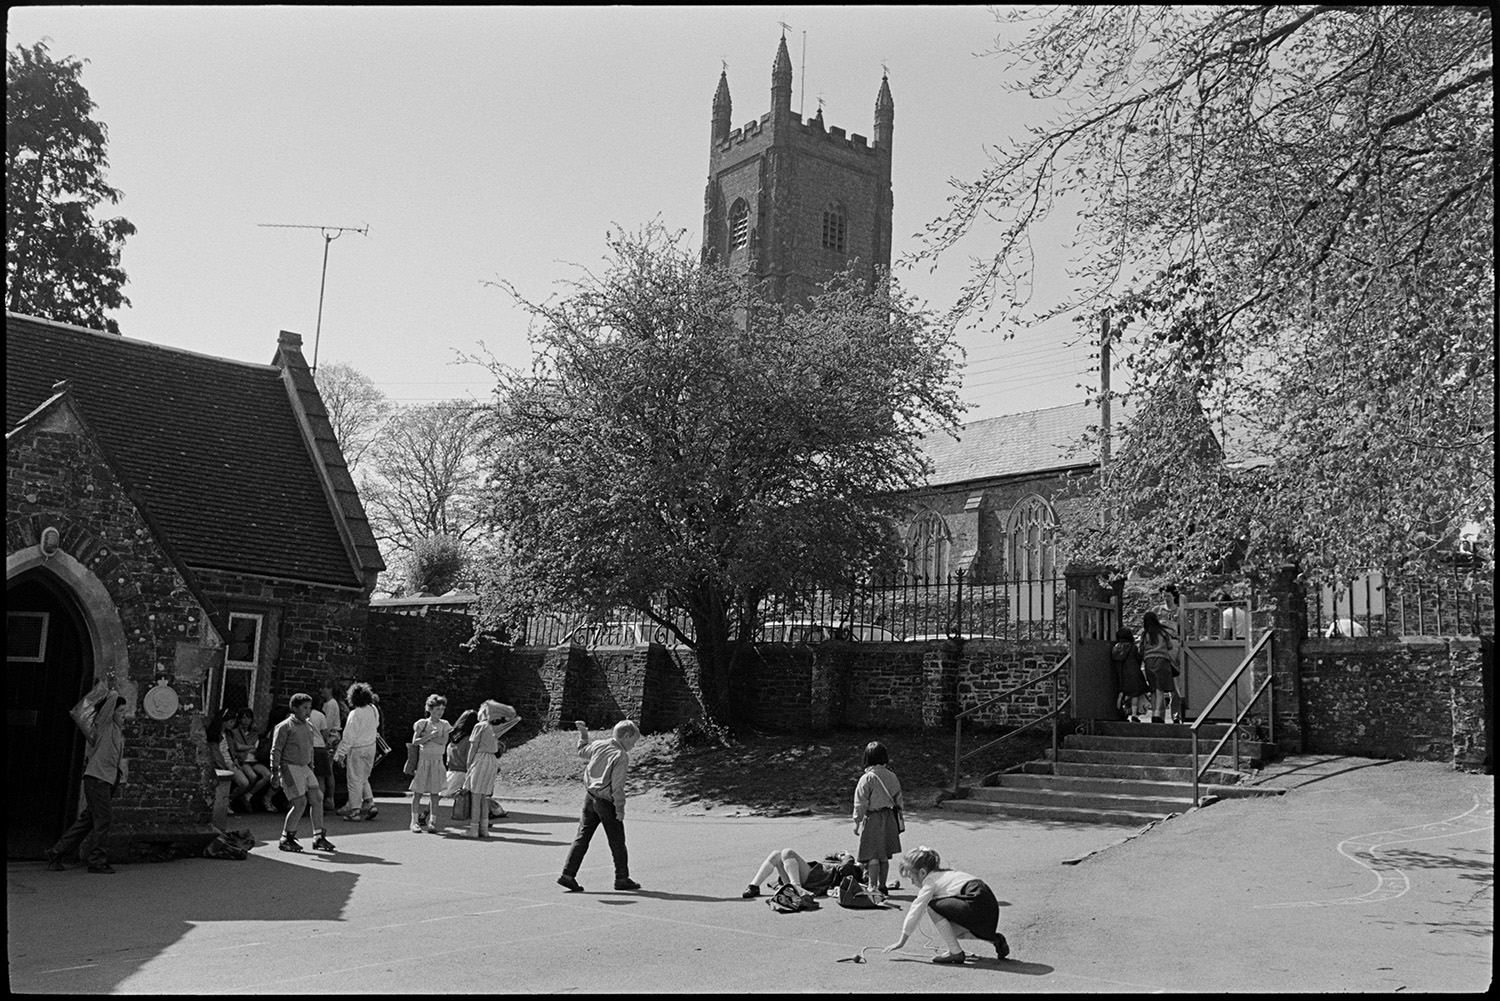 Children coming out of school. Going through cobbled streets in crocodile. Church tower.
[Children in the playground at the end of the school day at Chulmleigh Primary School. Some children are walking up the steps to meet their parents at the gate across the road from the church, which is visible in the background.]